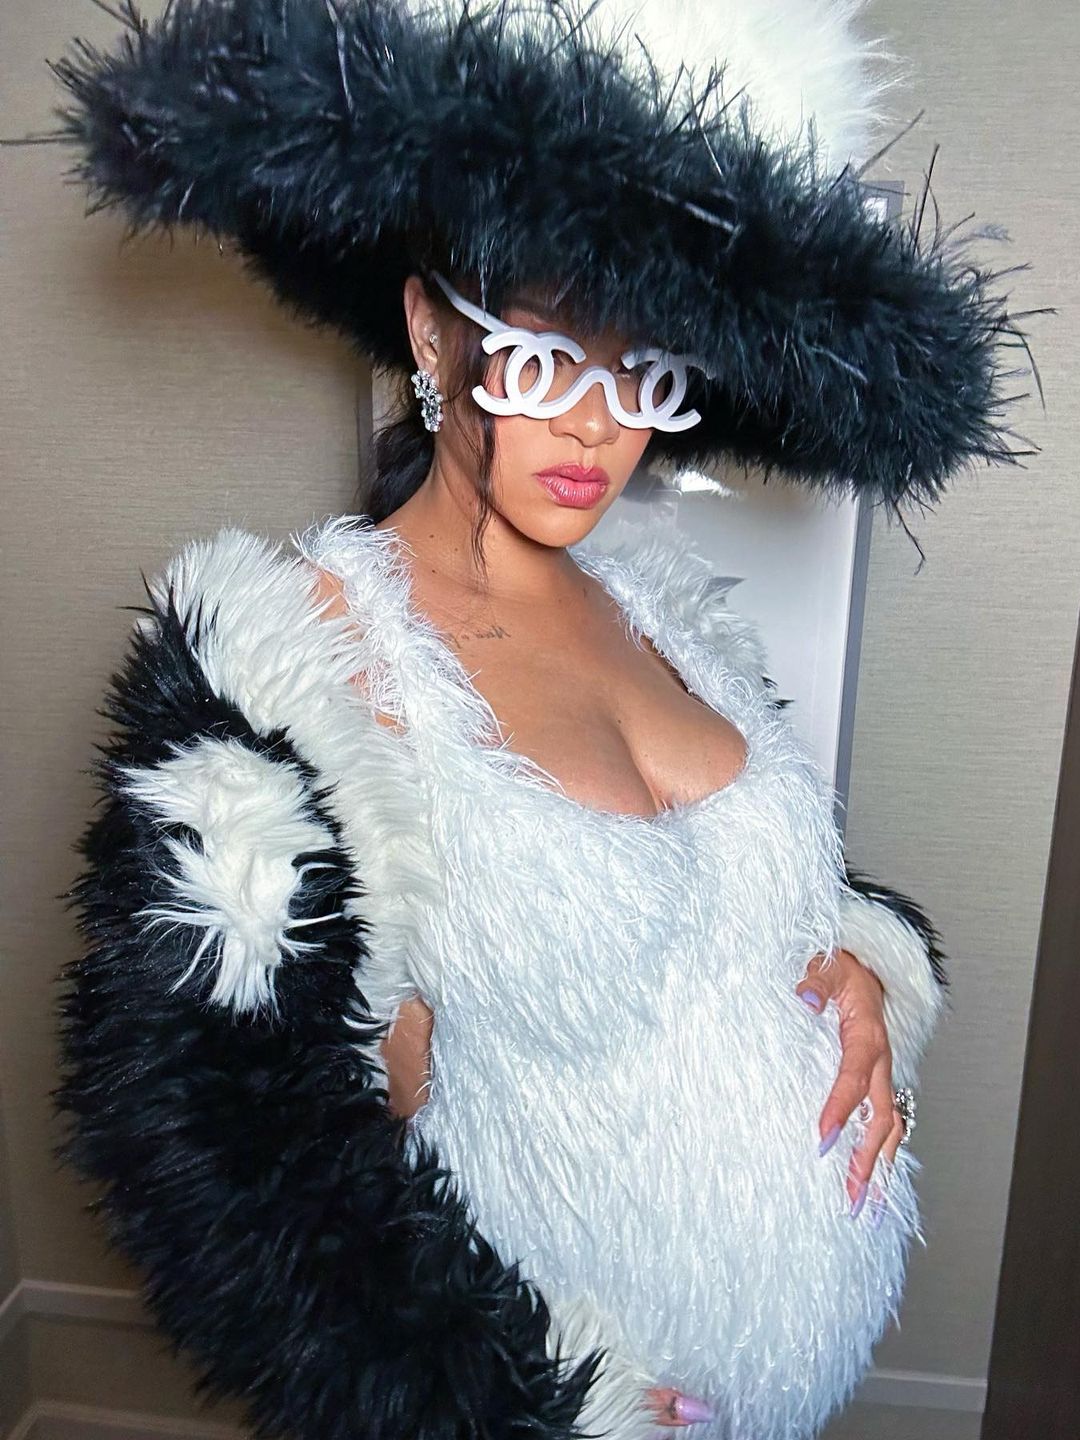 Rihanna wears a bacl and white feather outfit and large brim hat with Chanel logo sunglasses